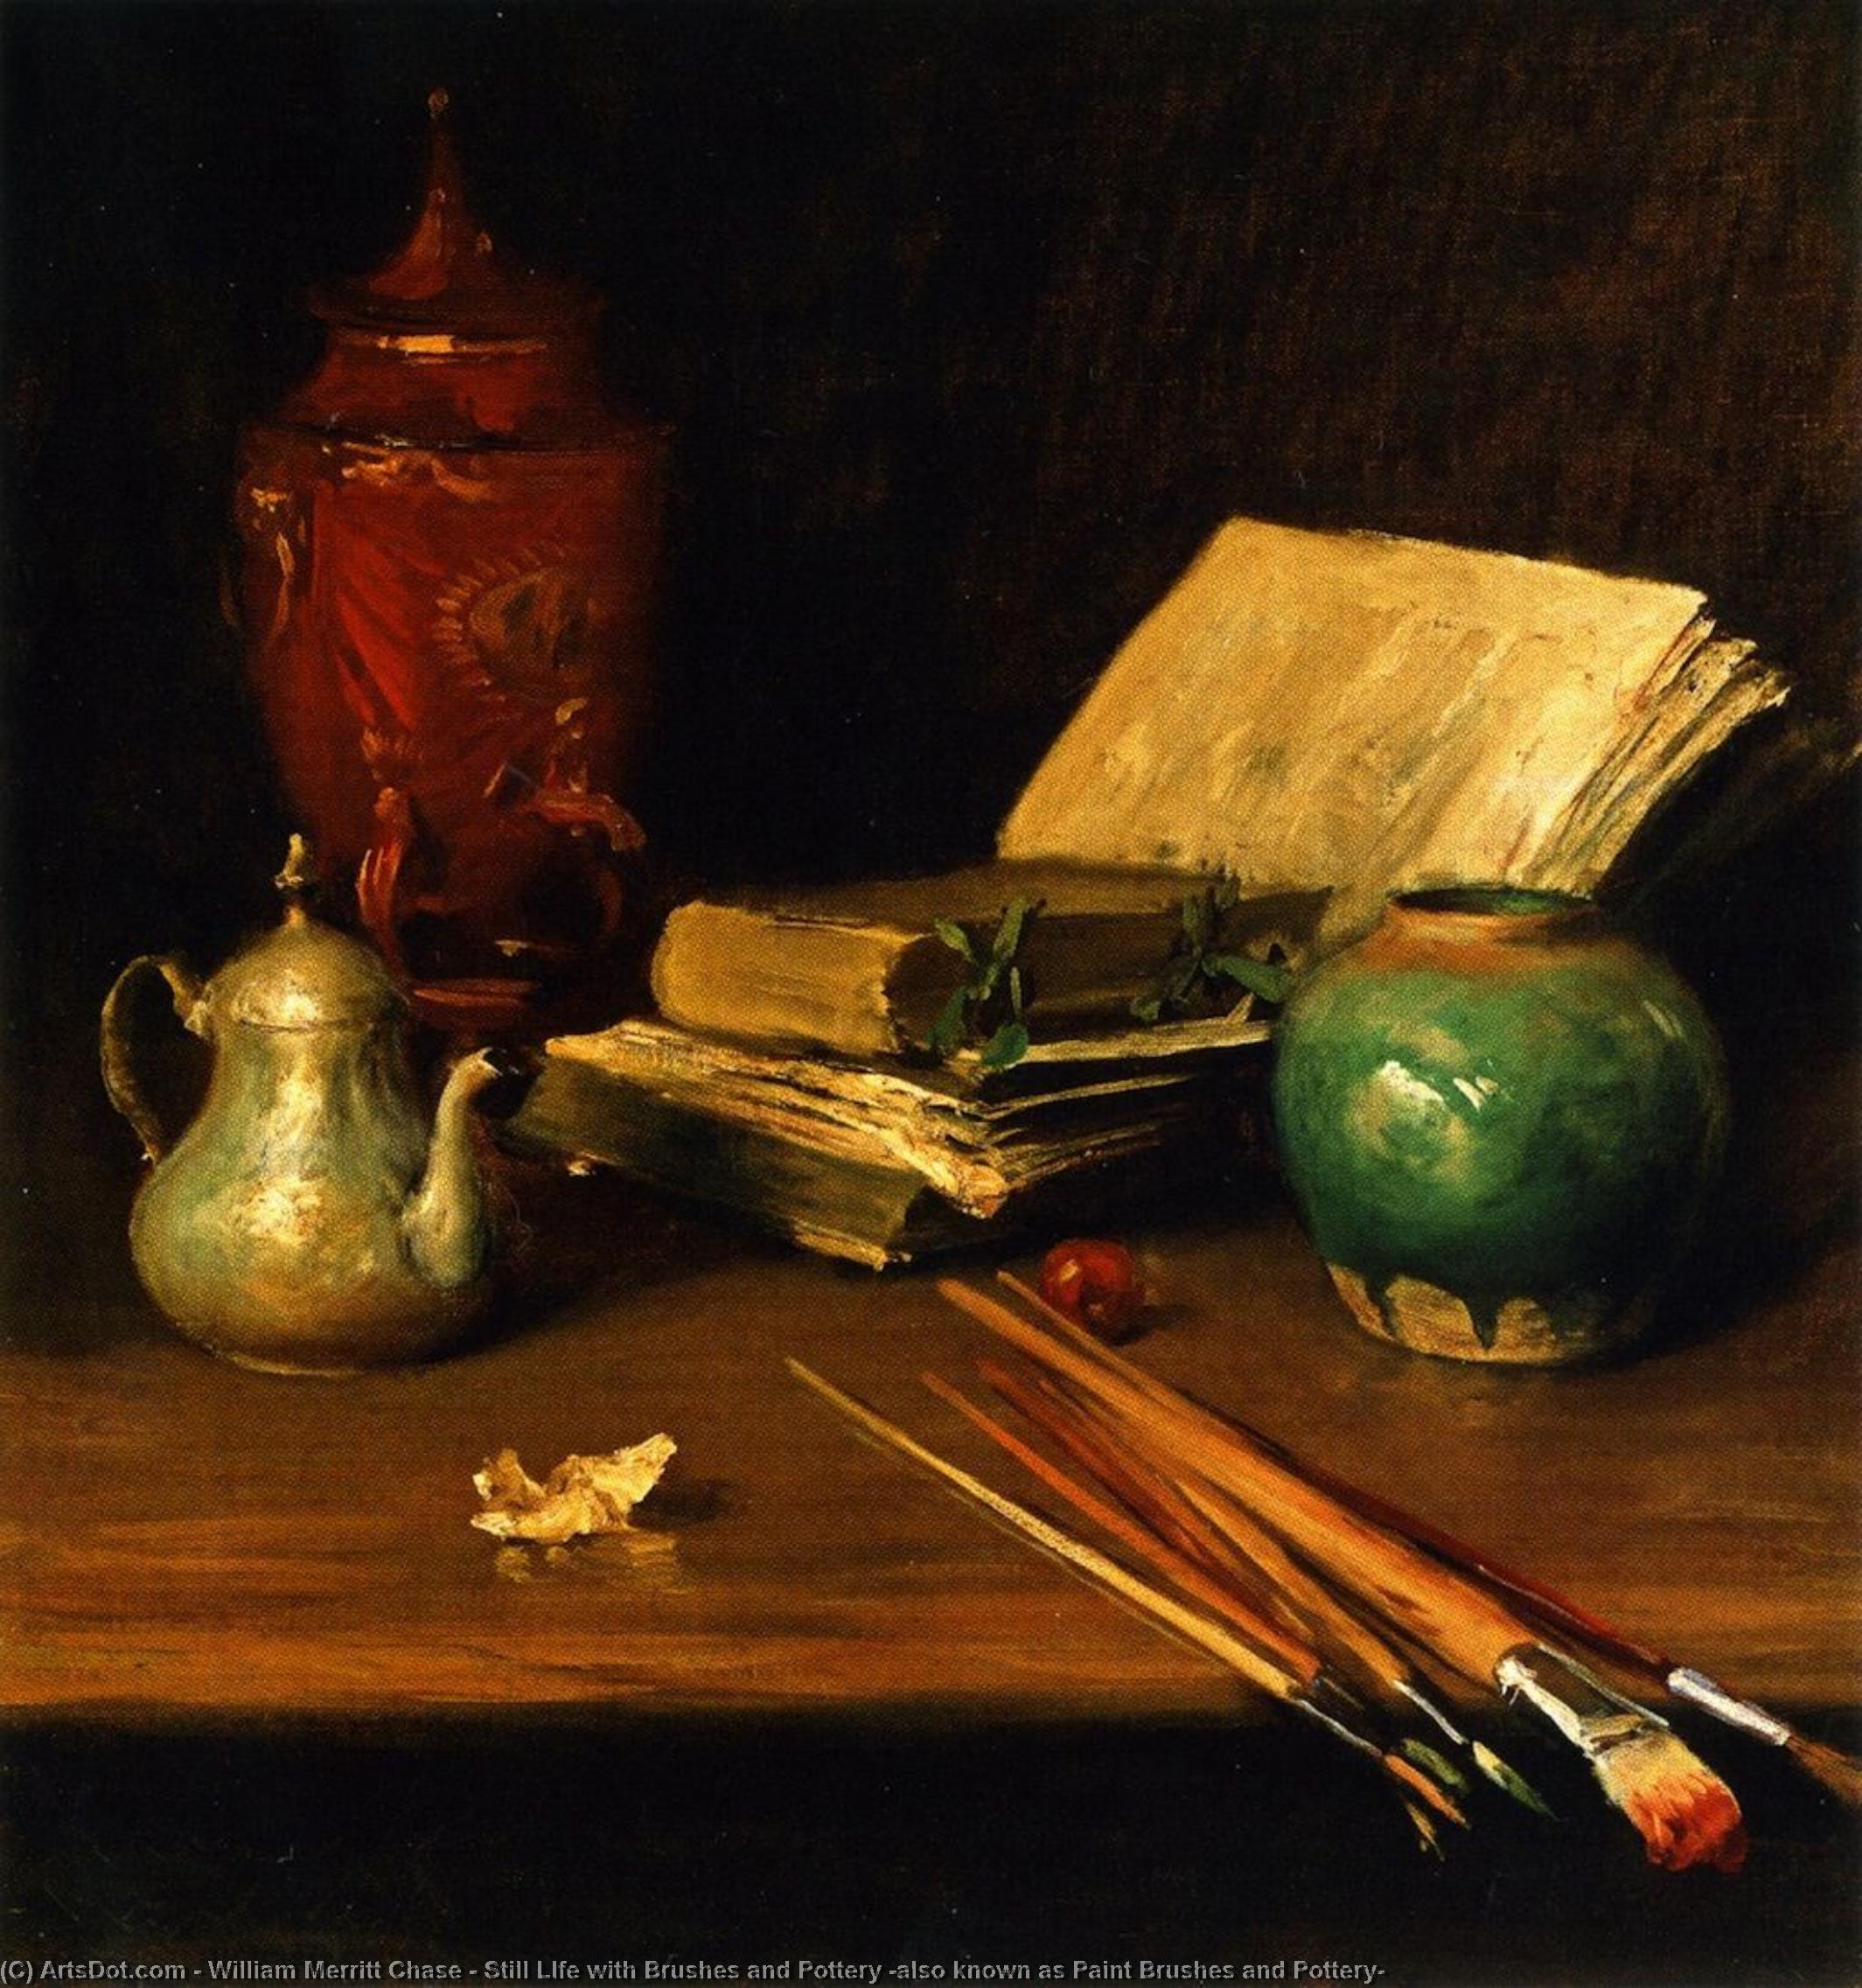 WikiOO.org - Encyclopedia of Fine Arts - Målning, konstverk William Merritt Chase - Still LIfe with Brushes and Pottery (also known as Paint Brushes and Pottery)